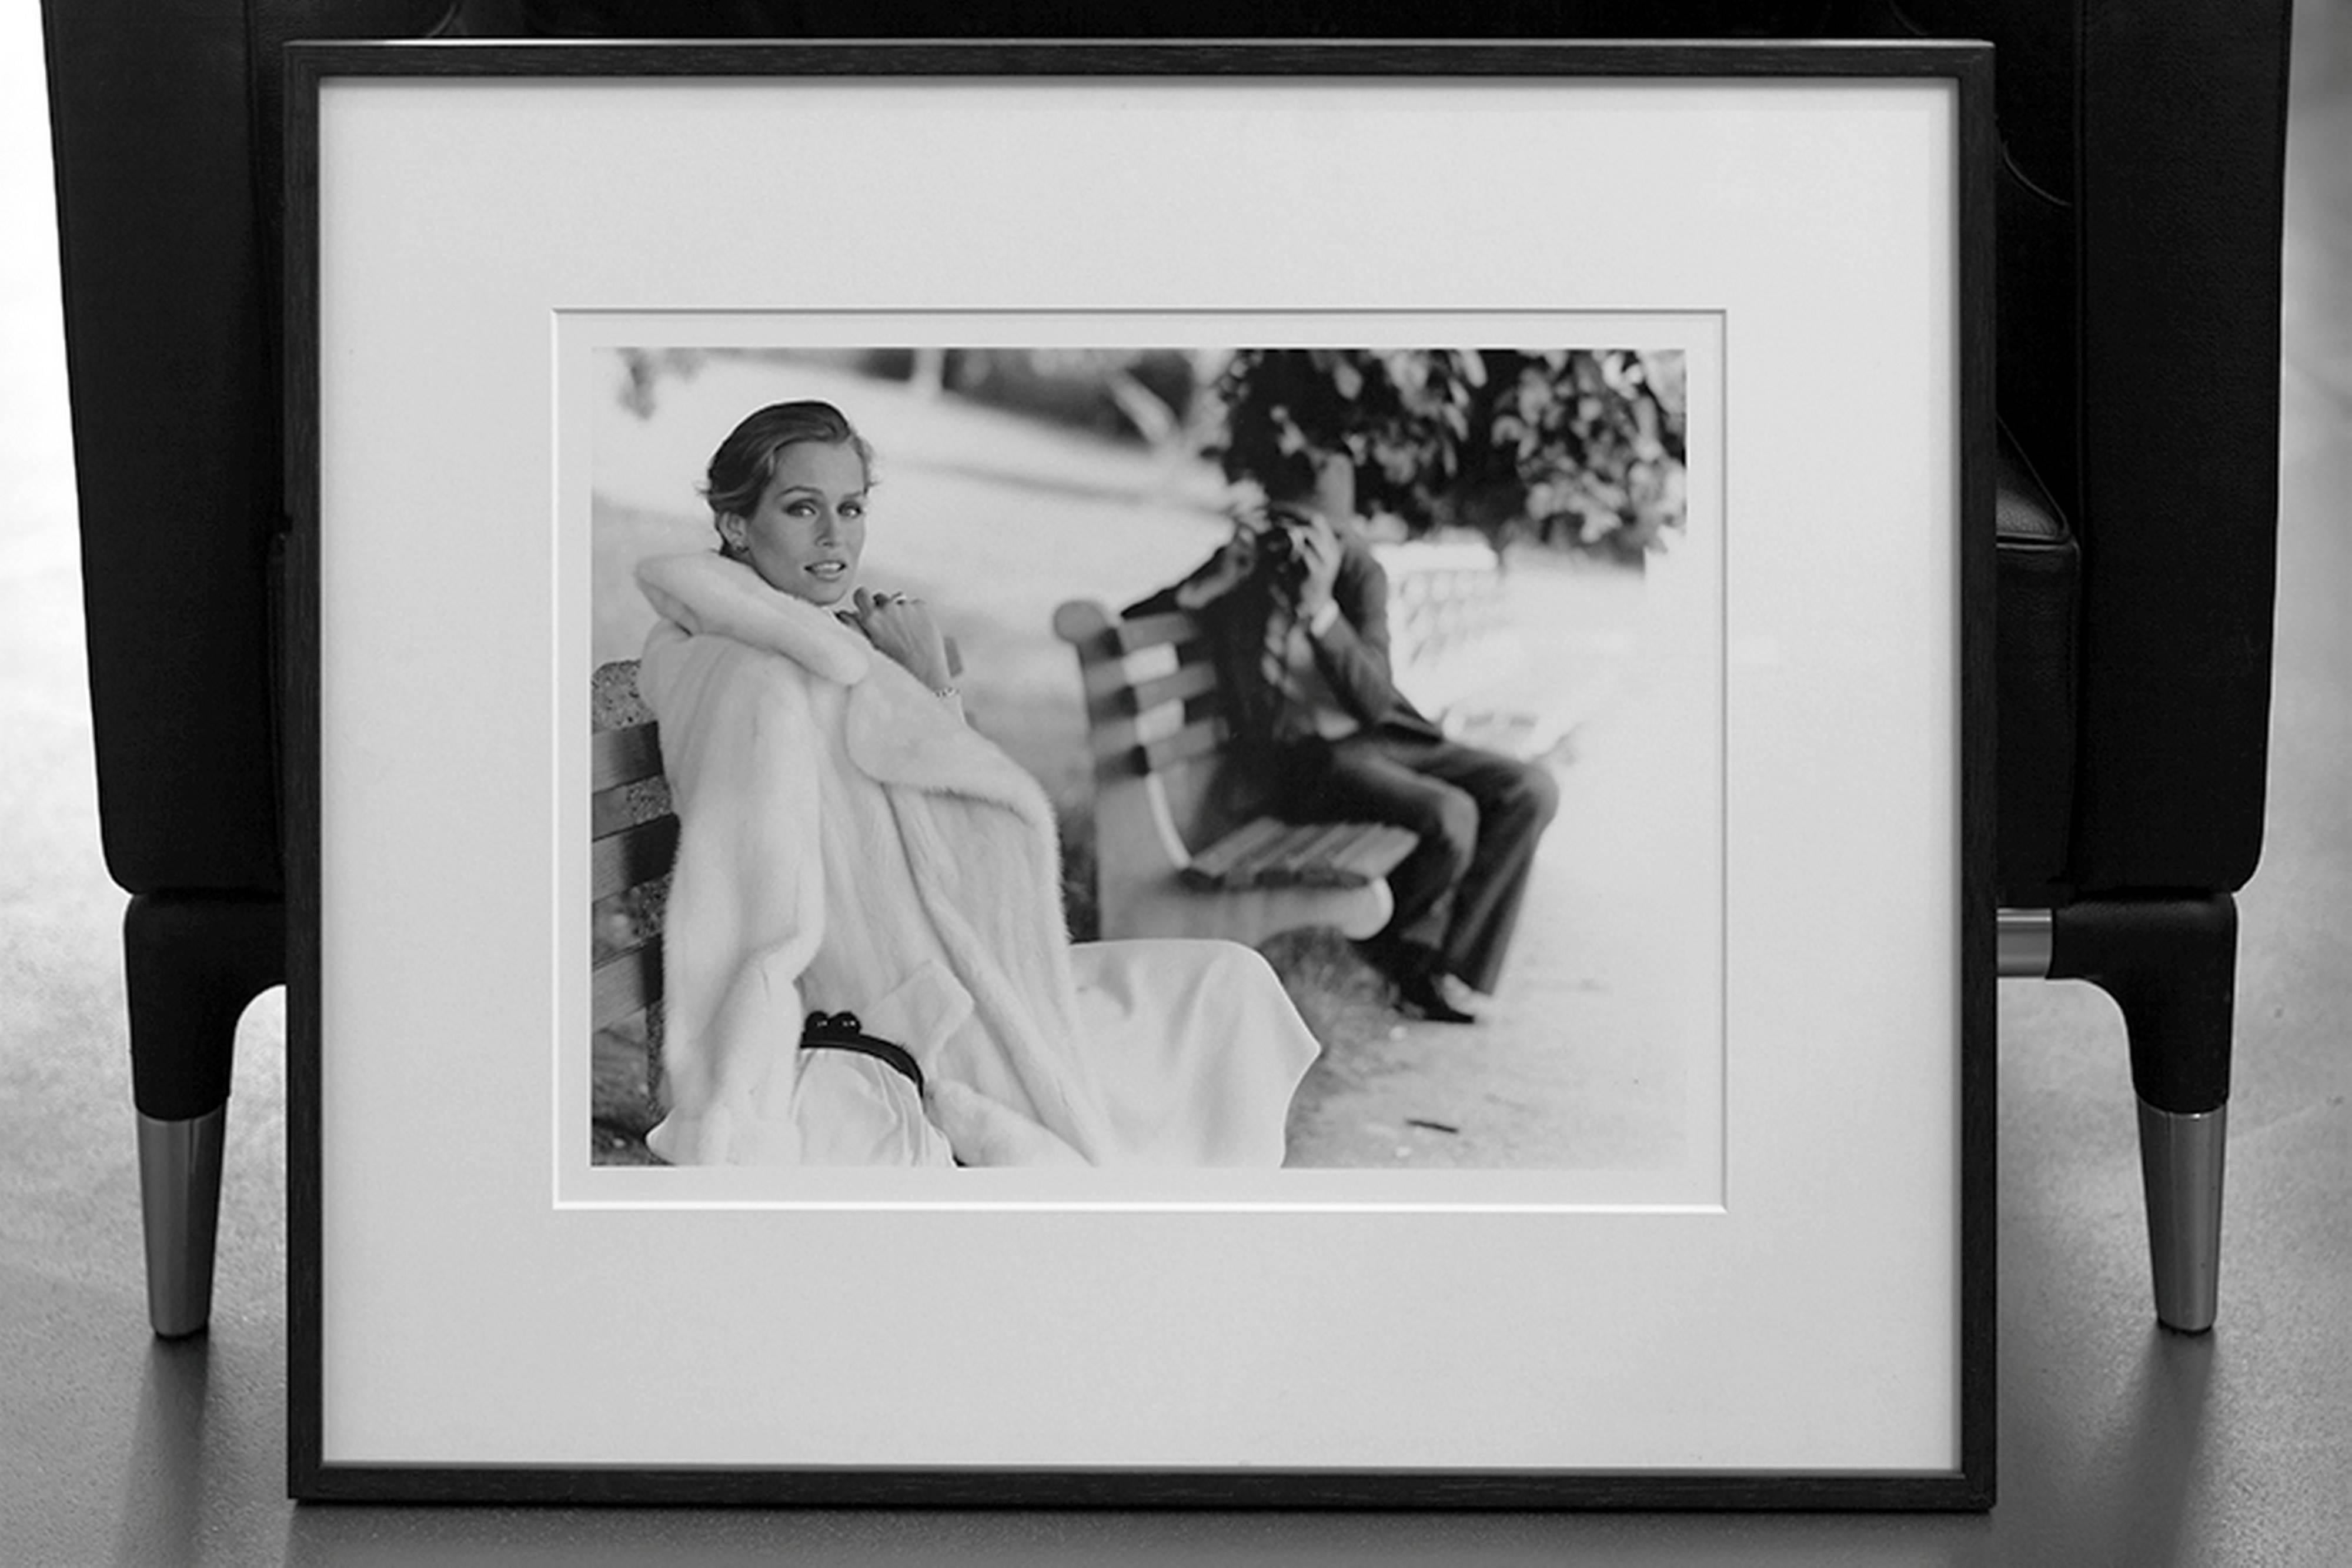 Lauren Hutton-fashion portrait of the supermodel together with the photographer - Photograph by Arthur Elgort